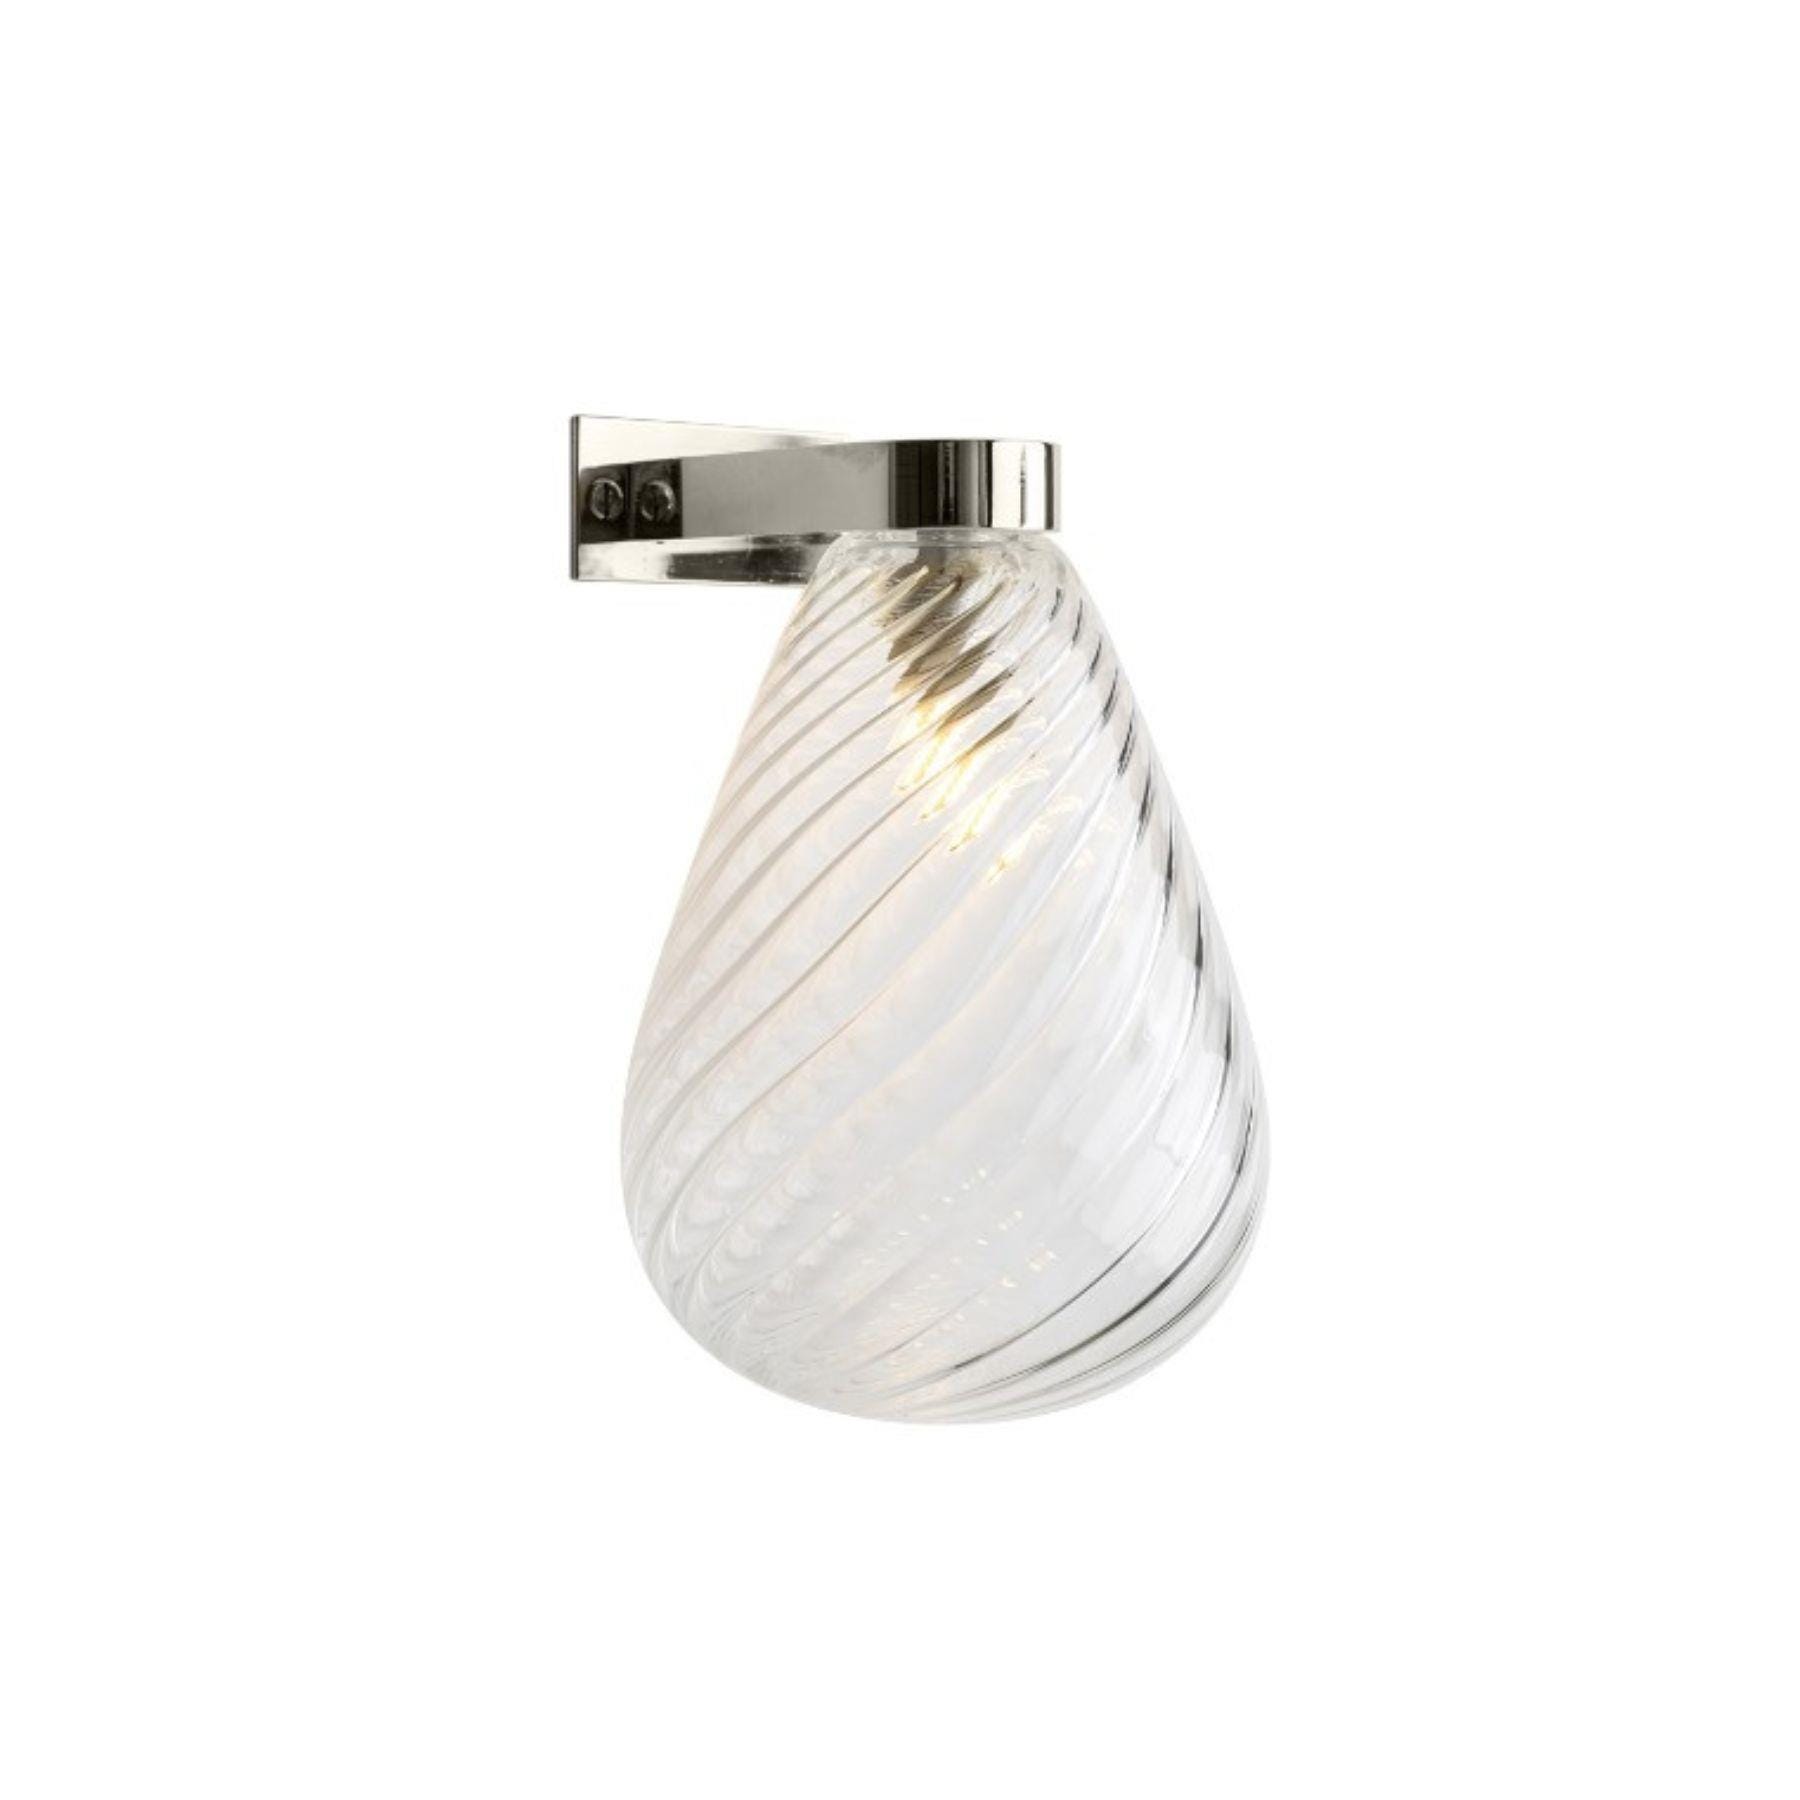 Leverint Kingston Deco Wall Light Ribbed Wall Lighting Clear